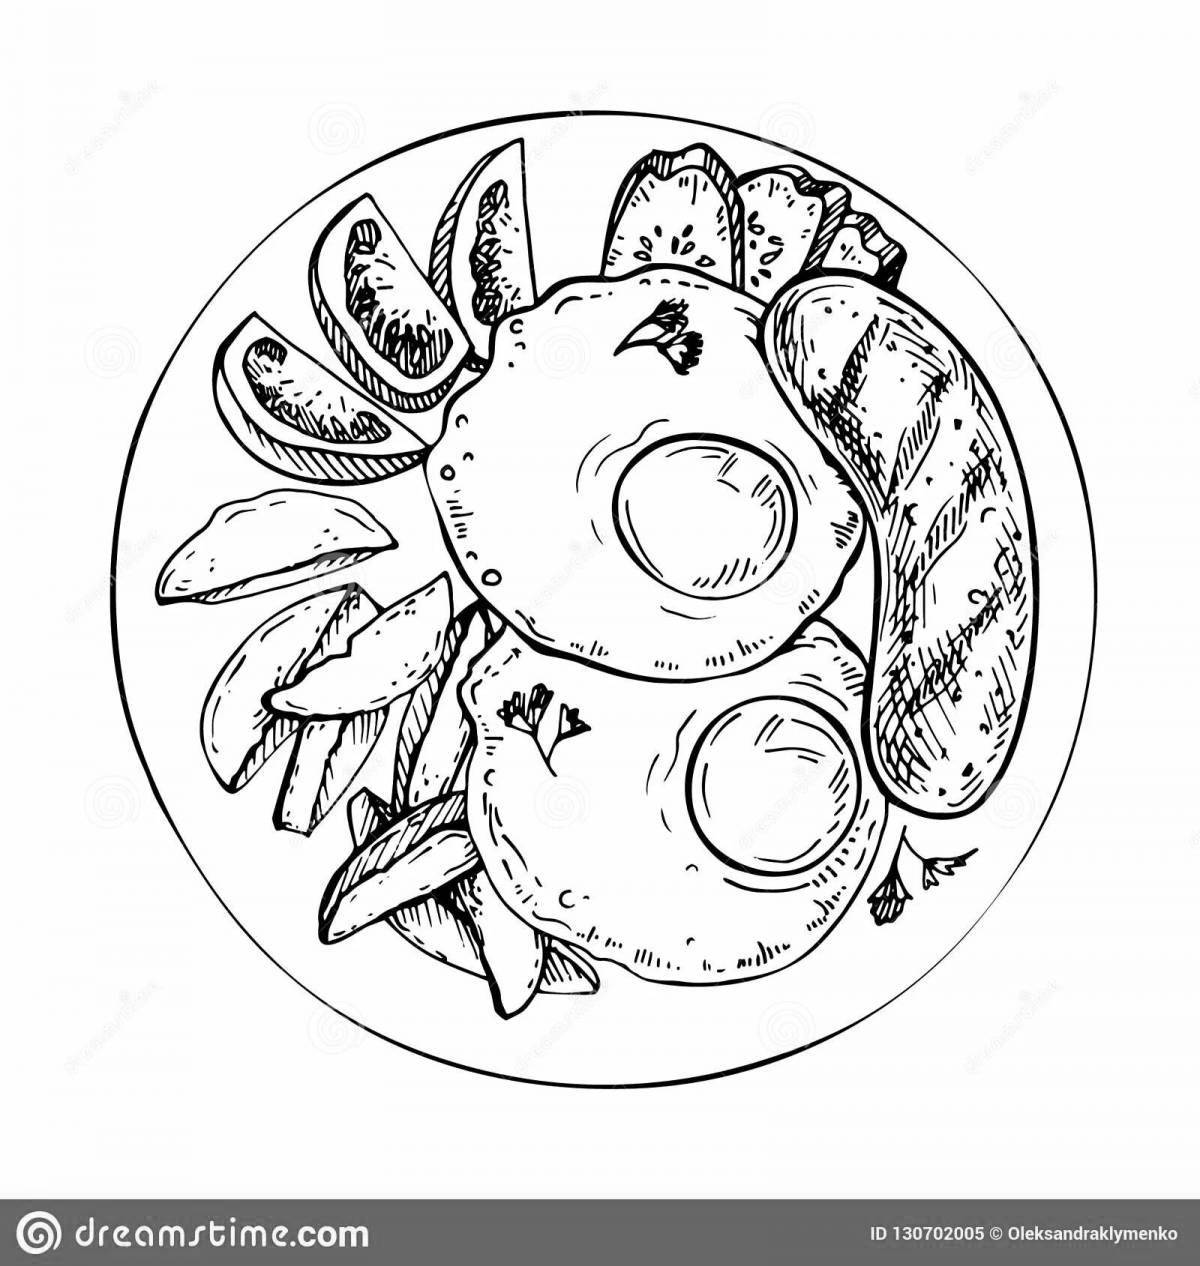 Great omelette coloring page